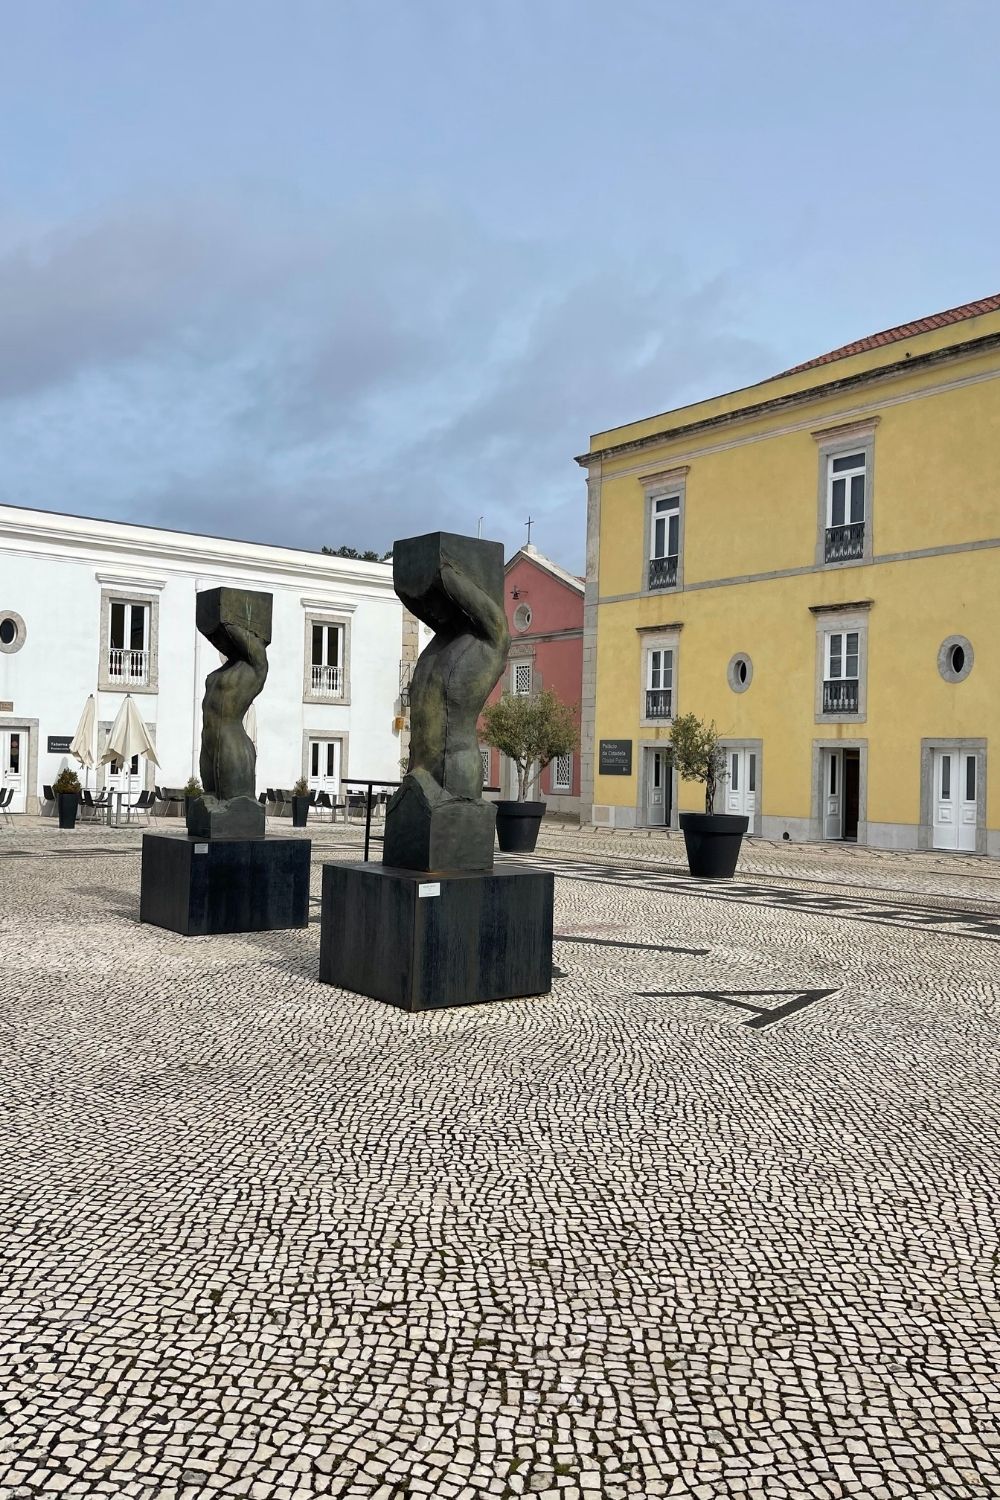 Three abstract sculptures stand in a public space, each with a distinct twisted form, possibly representing figures or movements. The sculptures are set against the background of classic European architecture and a cobblestone square, suggesting an area rich in history and culture.